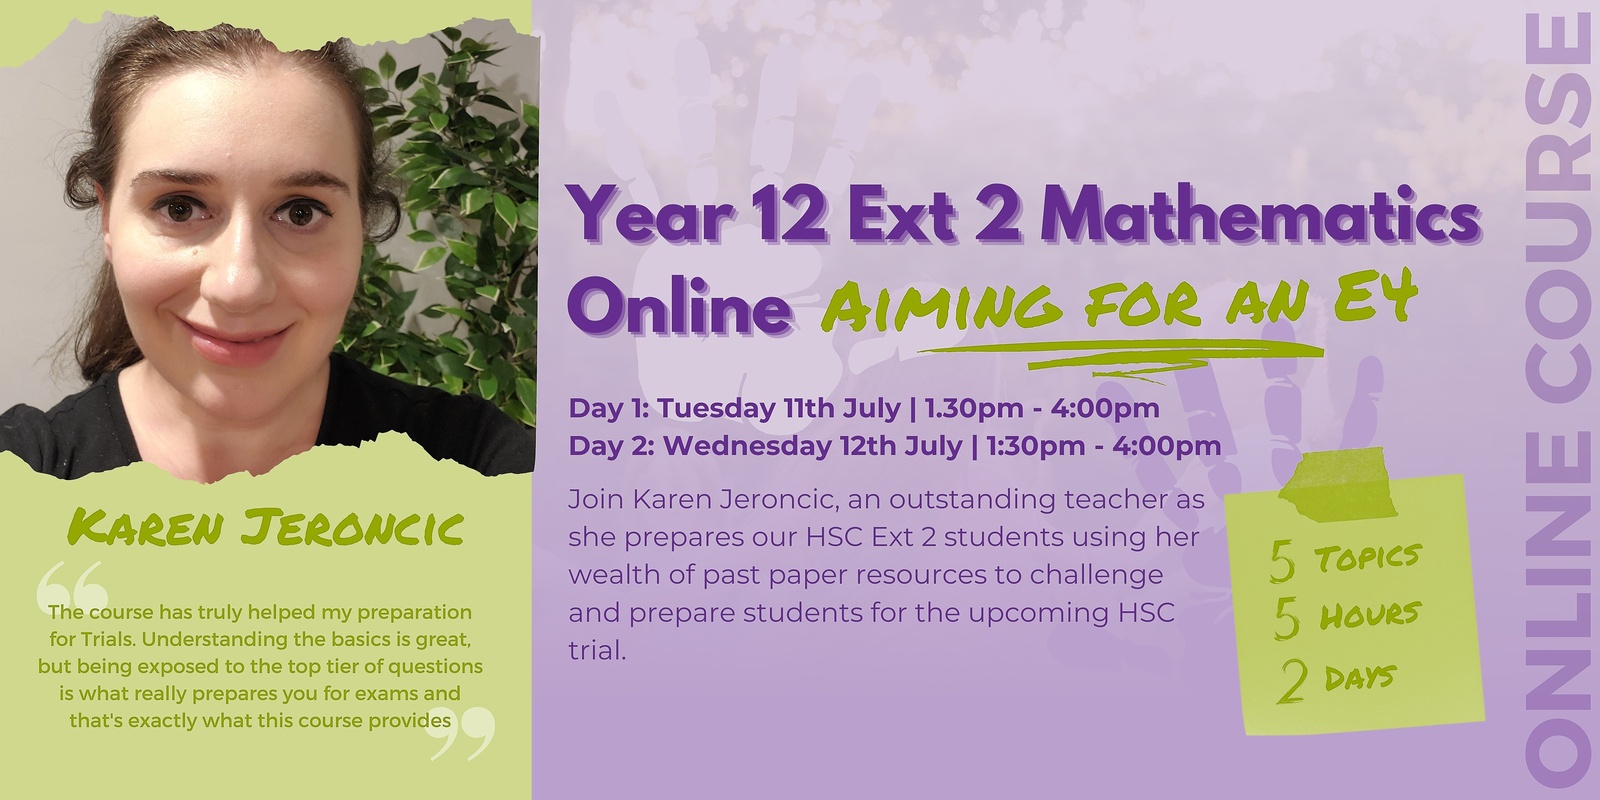 Banner image for Year 12 Ext 2 Mathematics Package - Aiming for an E4